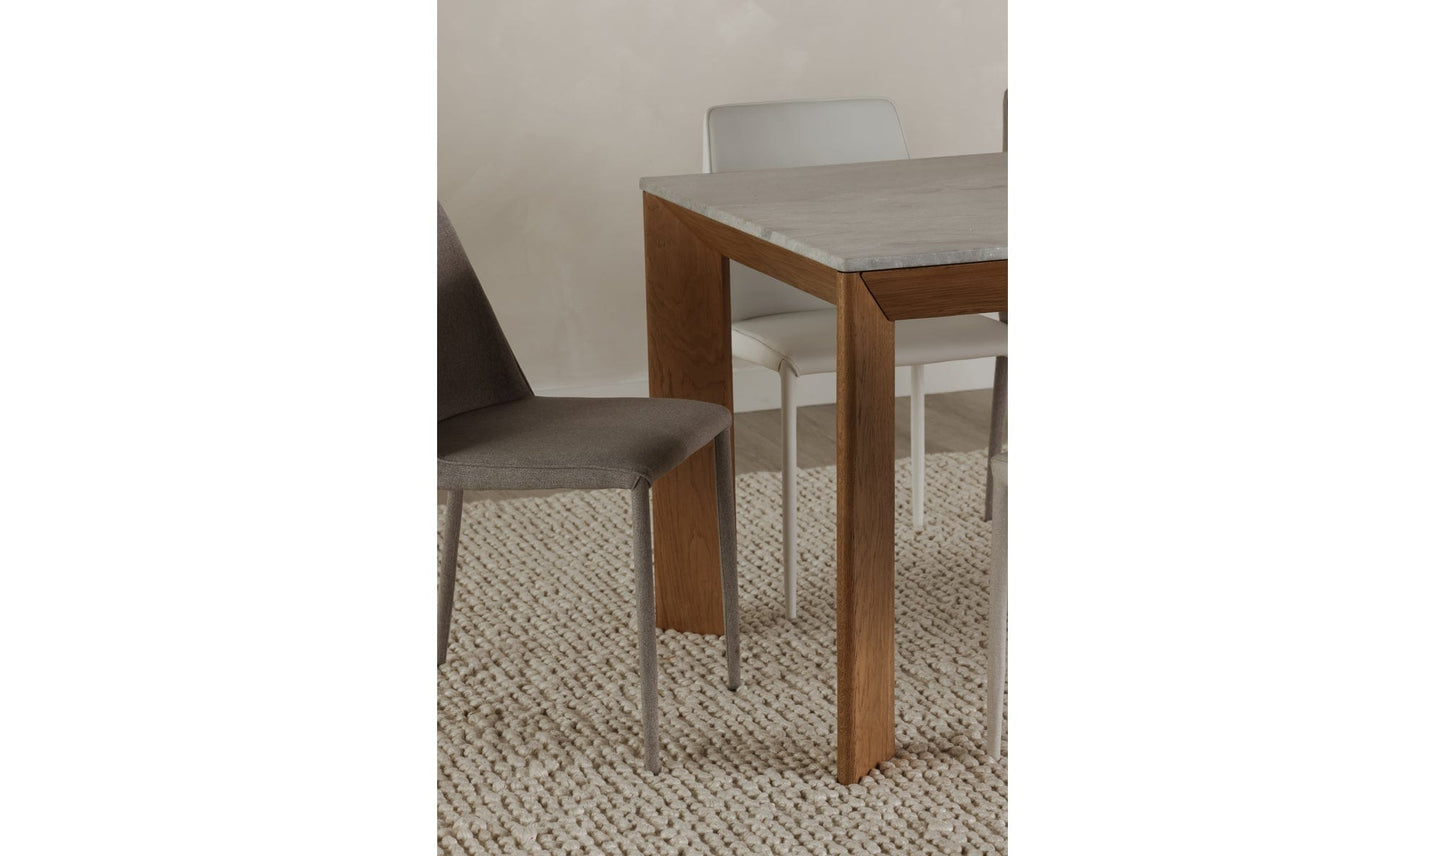 Moe's ANGLE MARBLE DINING RECTANGULAR TABLE